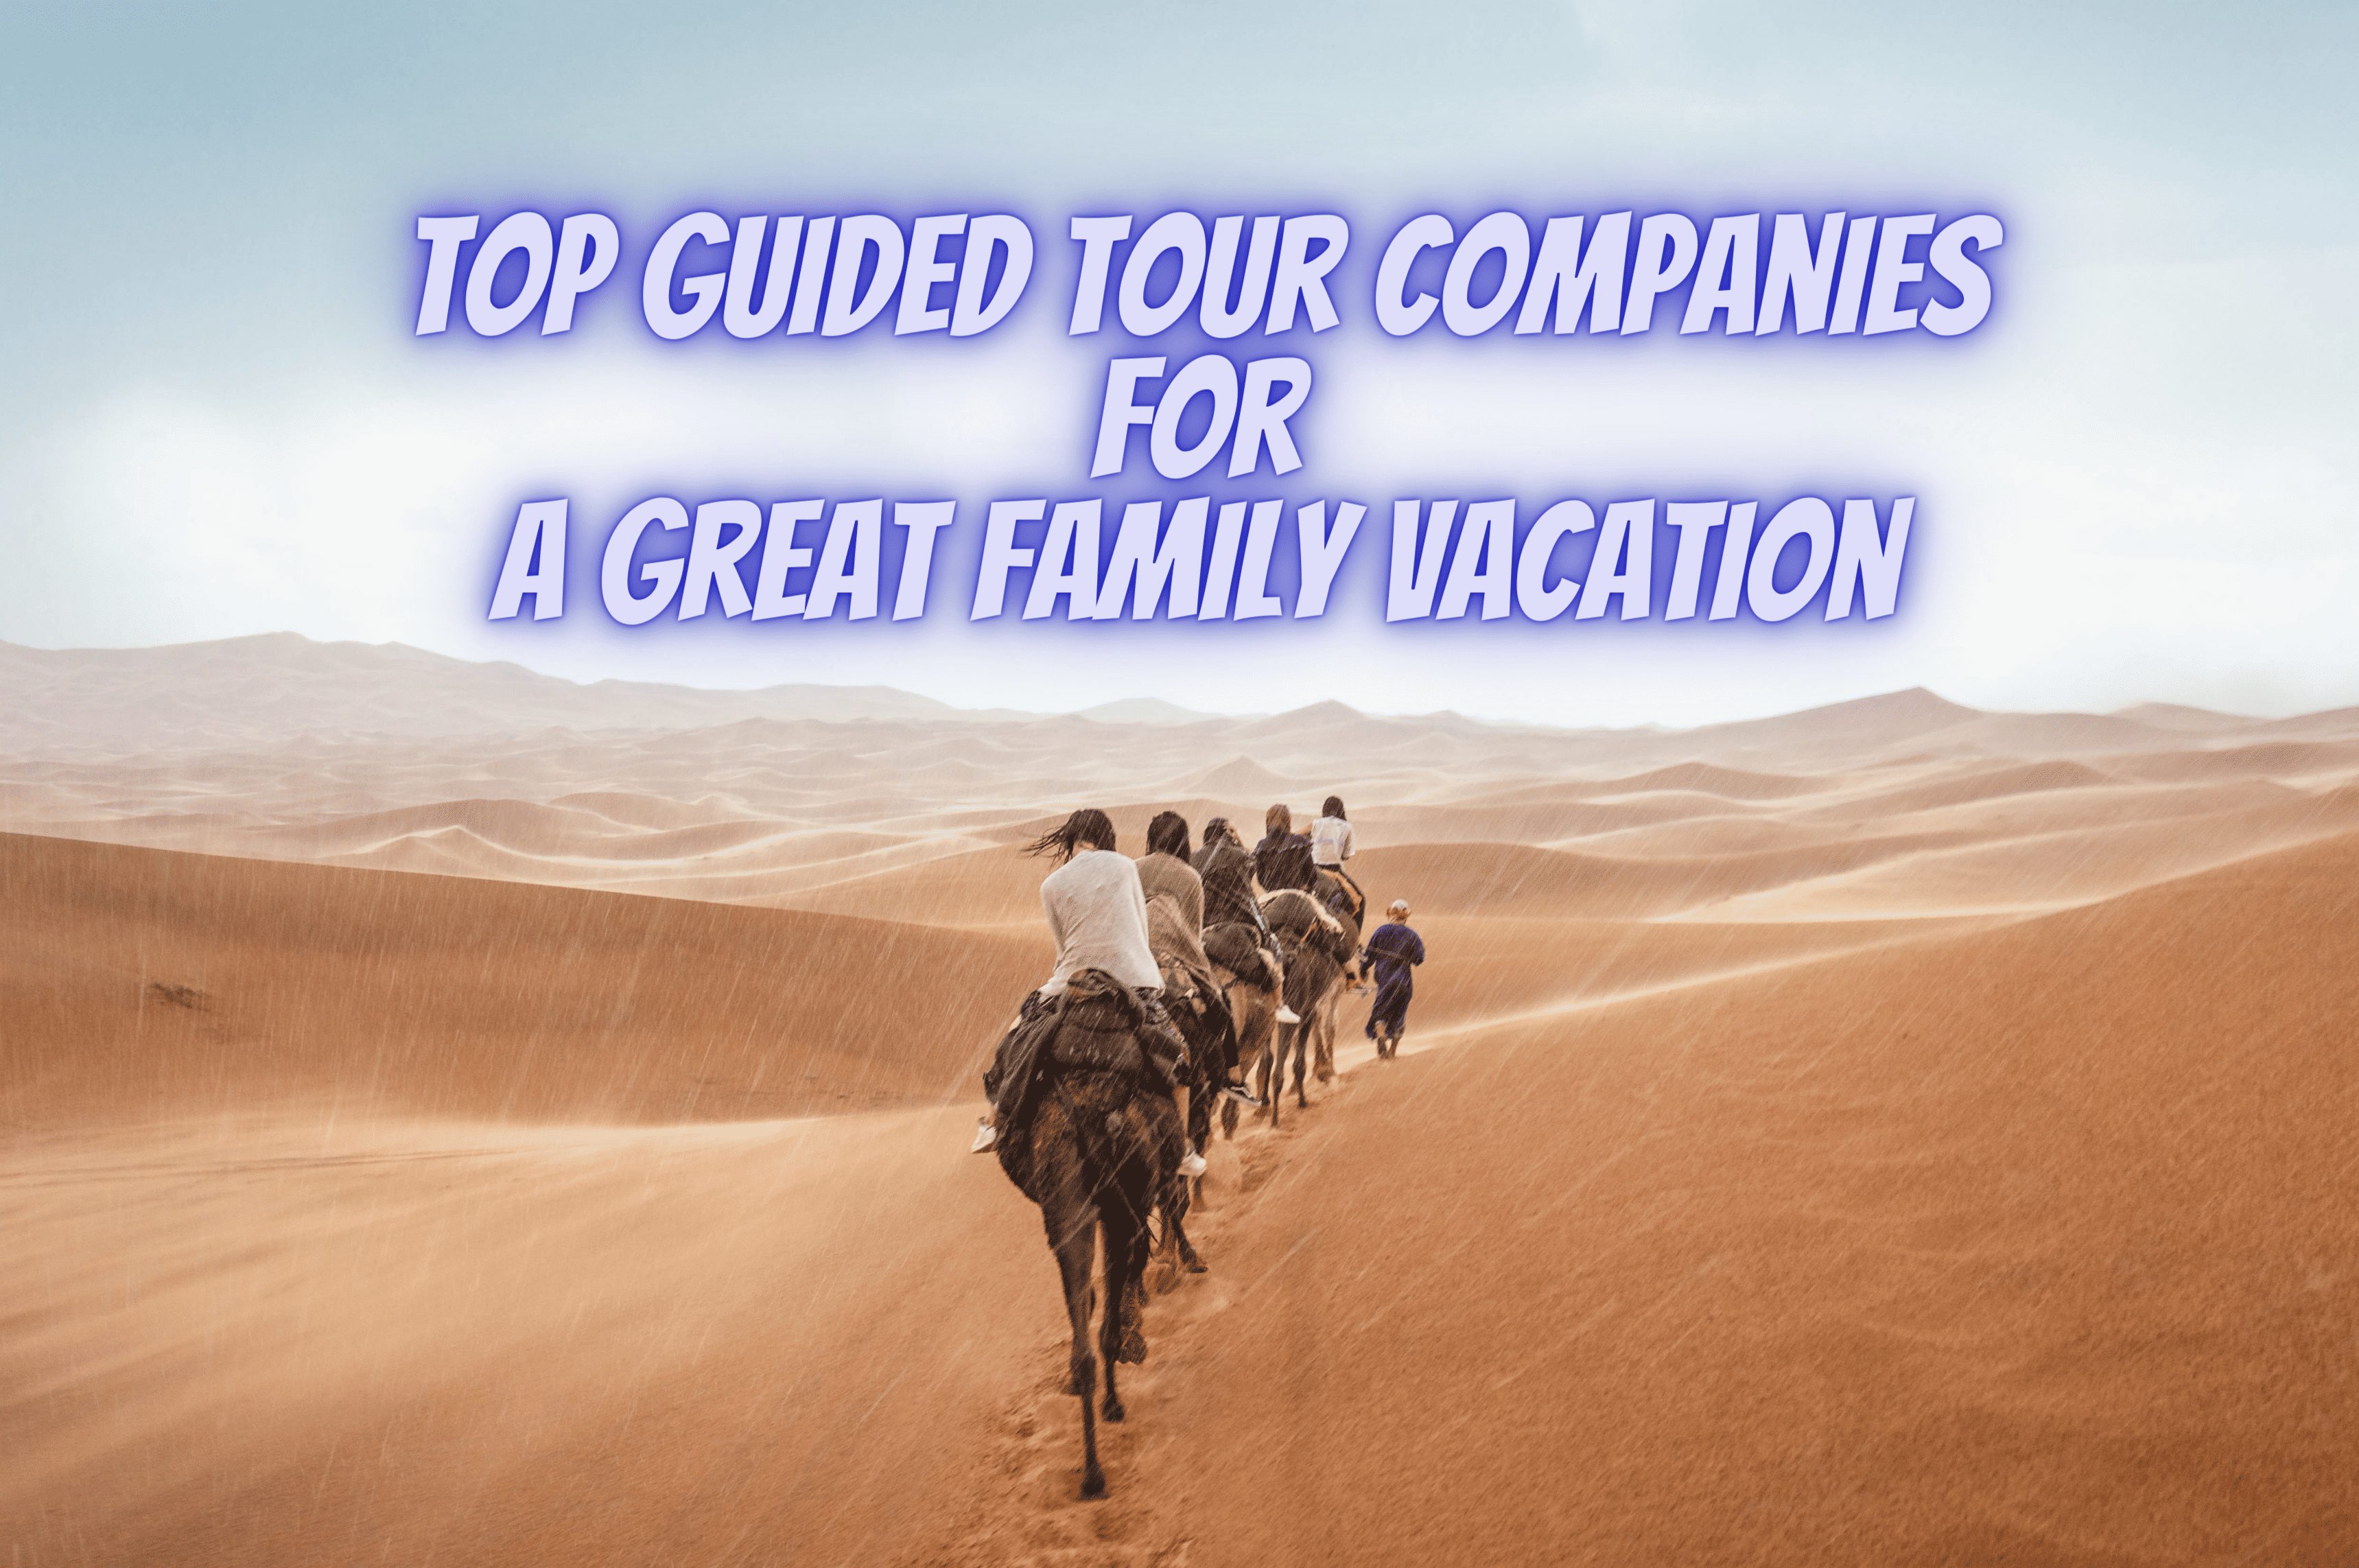 Top 8 Guided Tour Companies for a great Family Vacation